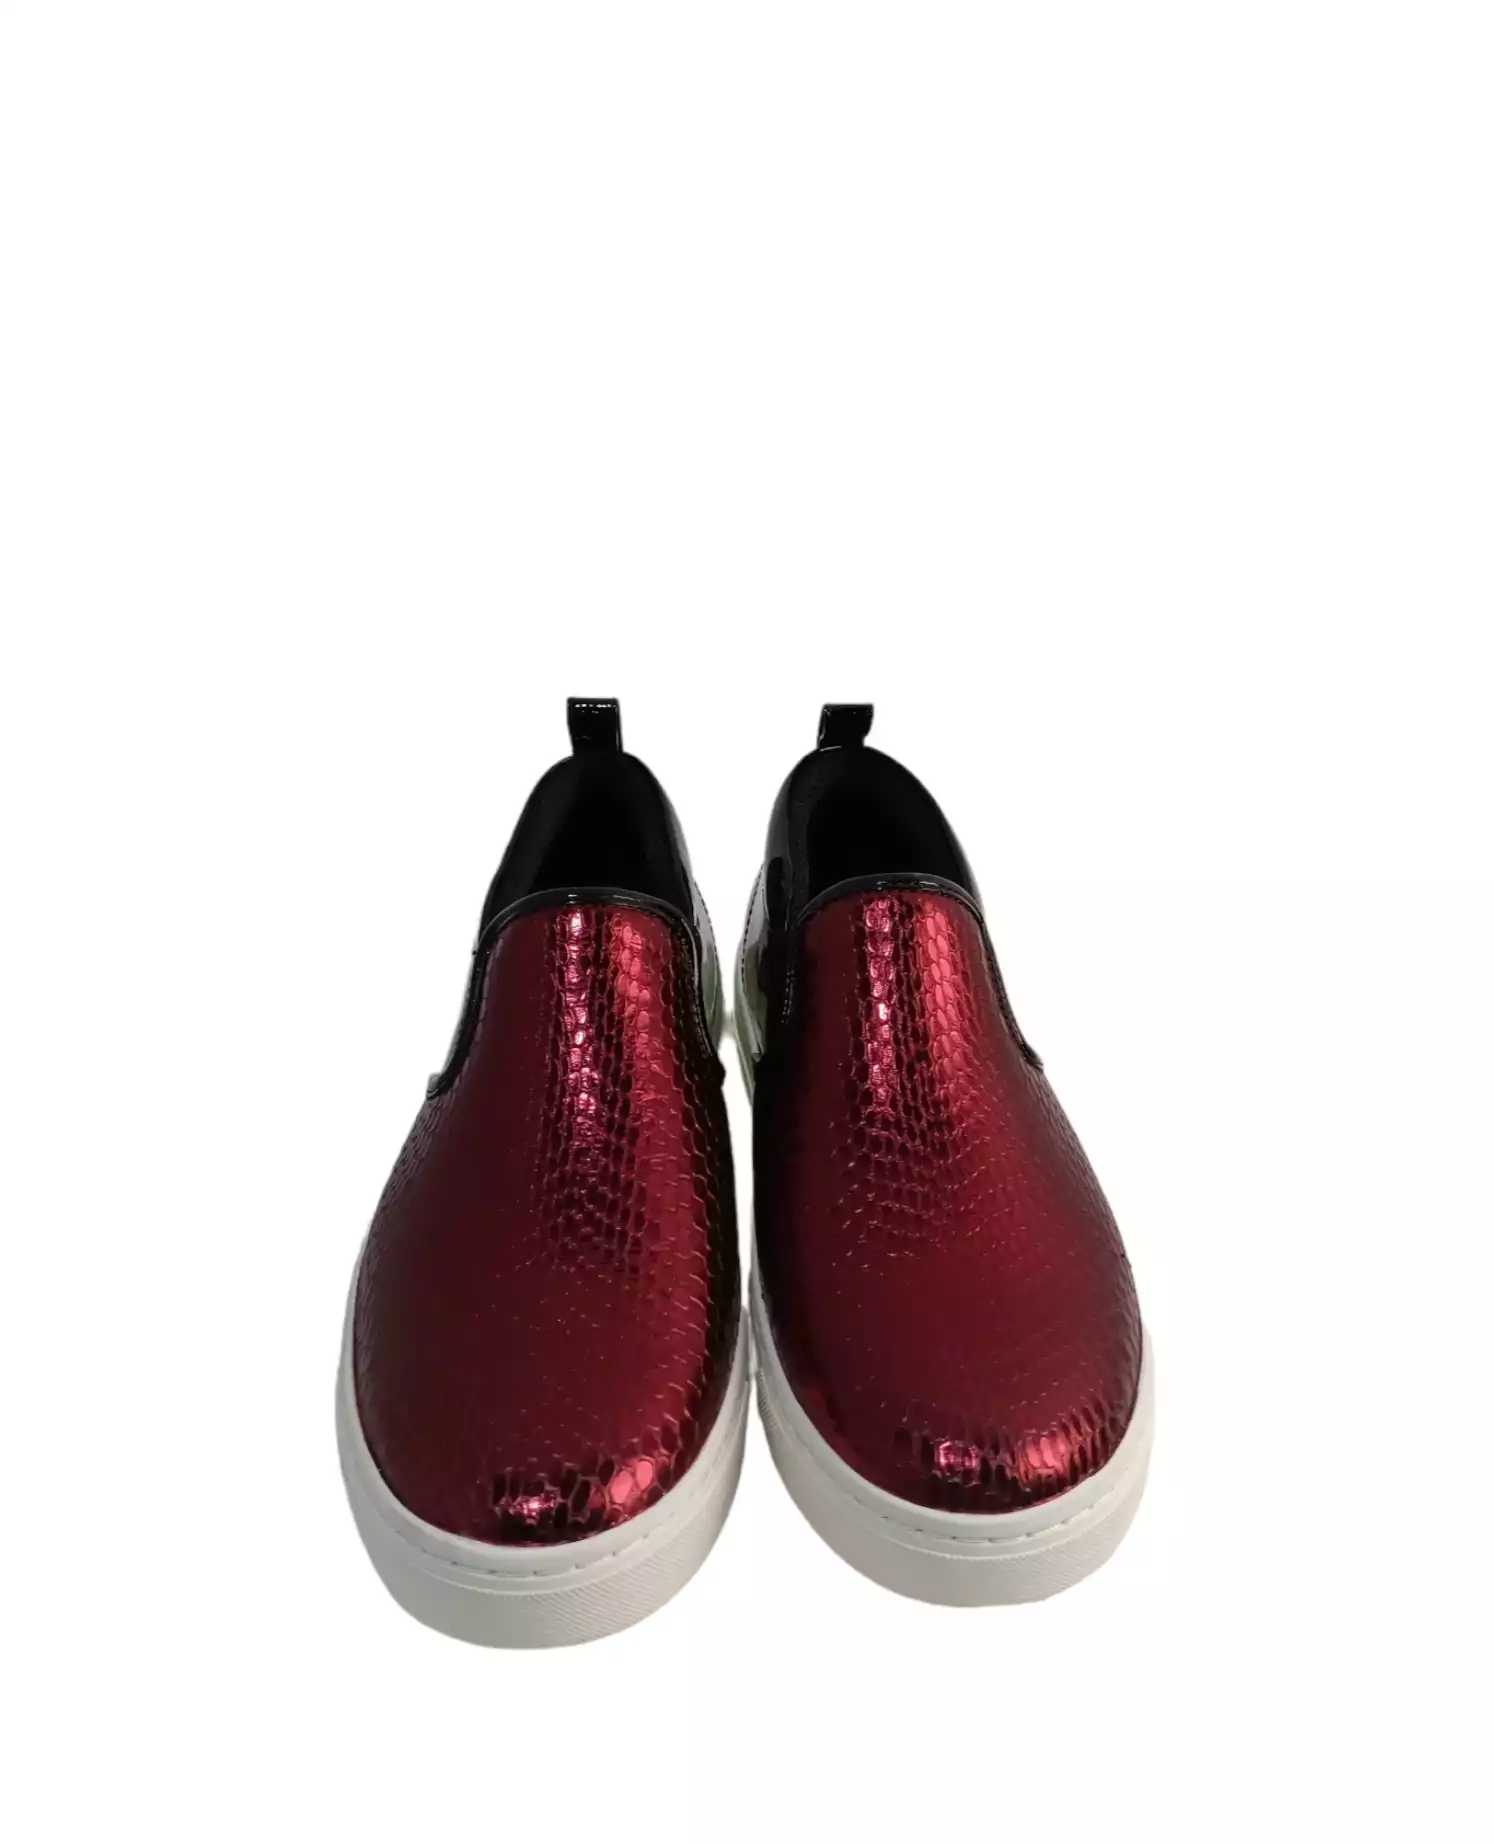 Shoes by Marc by Marc Jacobs